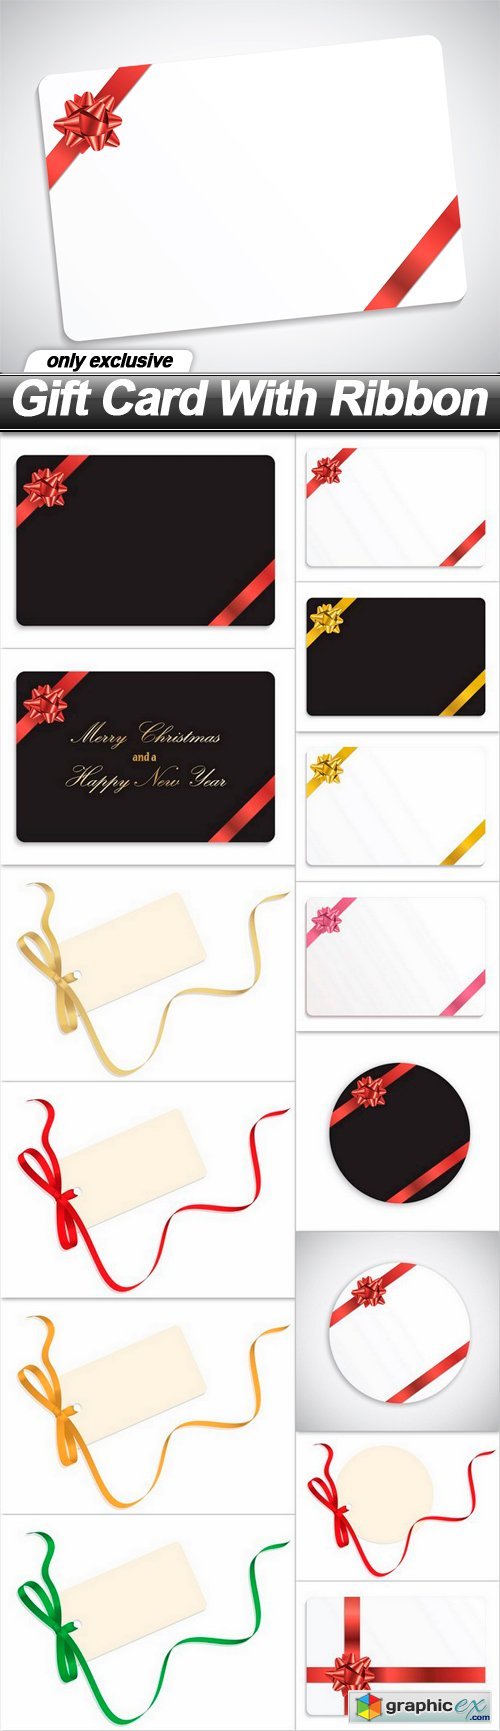 Gift Card With Ribbon - 15 EPS